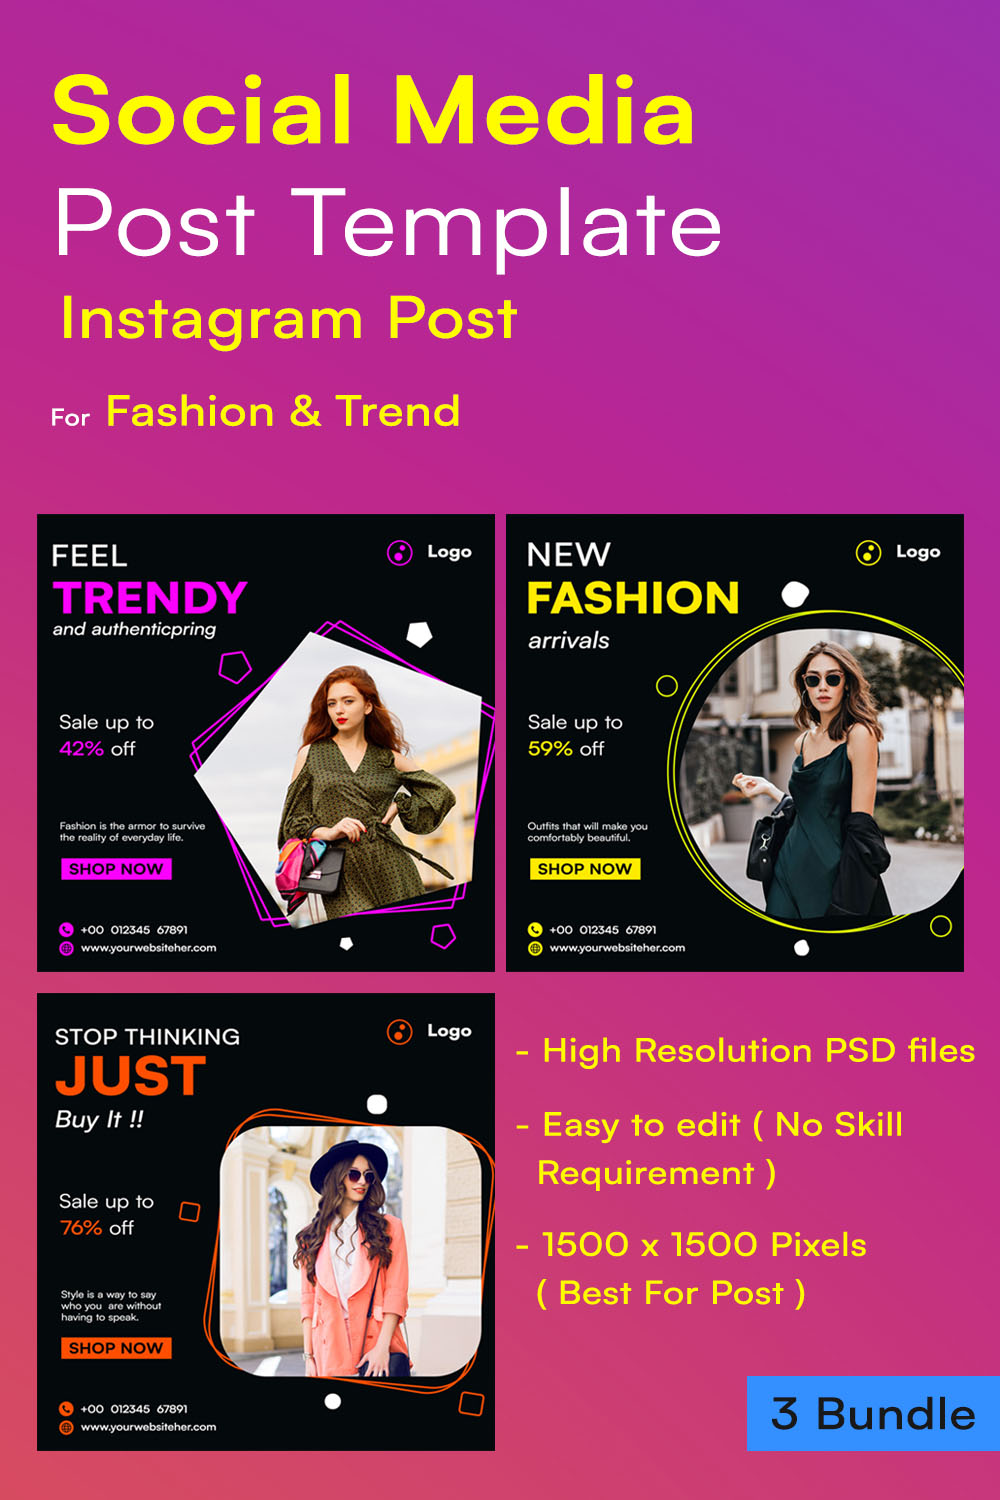 Fashion And Trend Social Media Post Design Templates Pinterest Image.